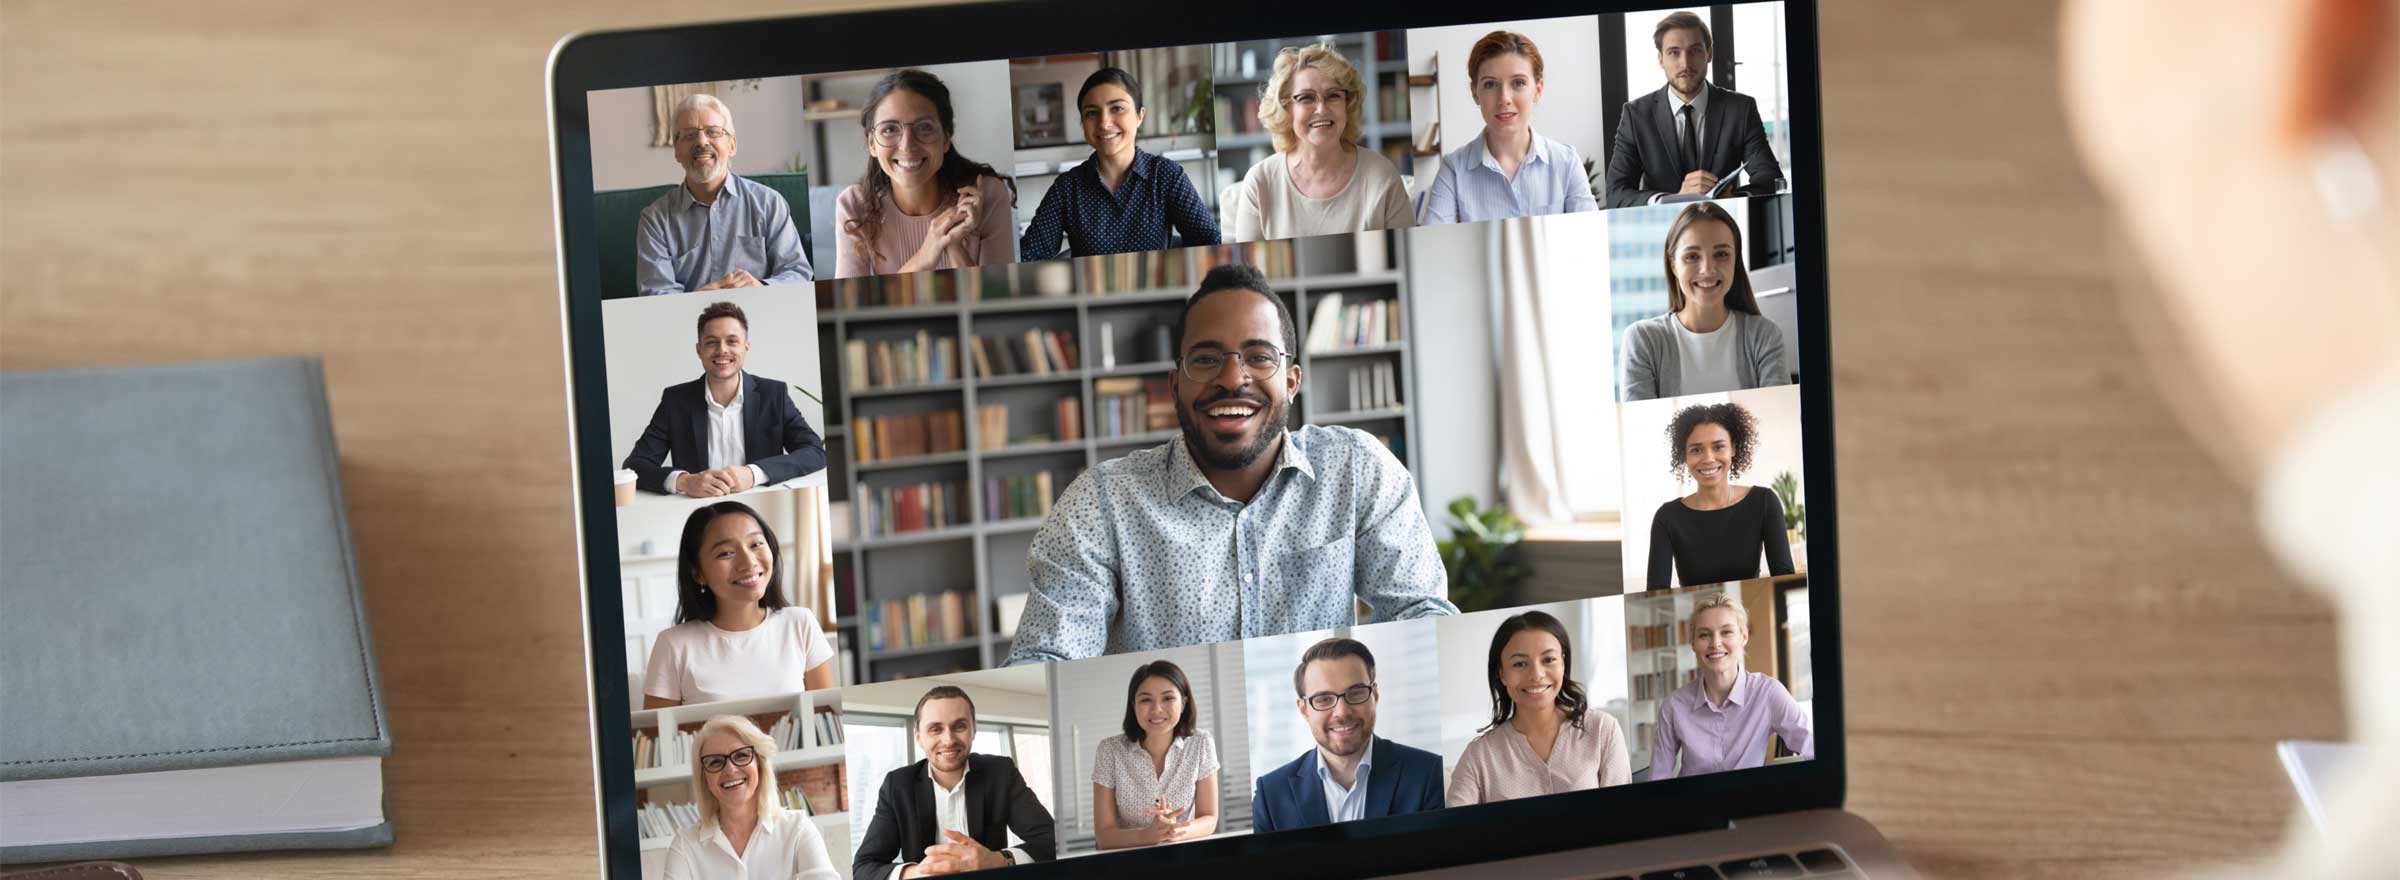 computer screen showing a video conference with a diverse group of people